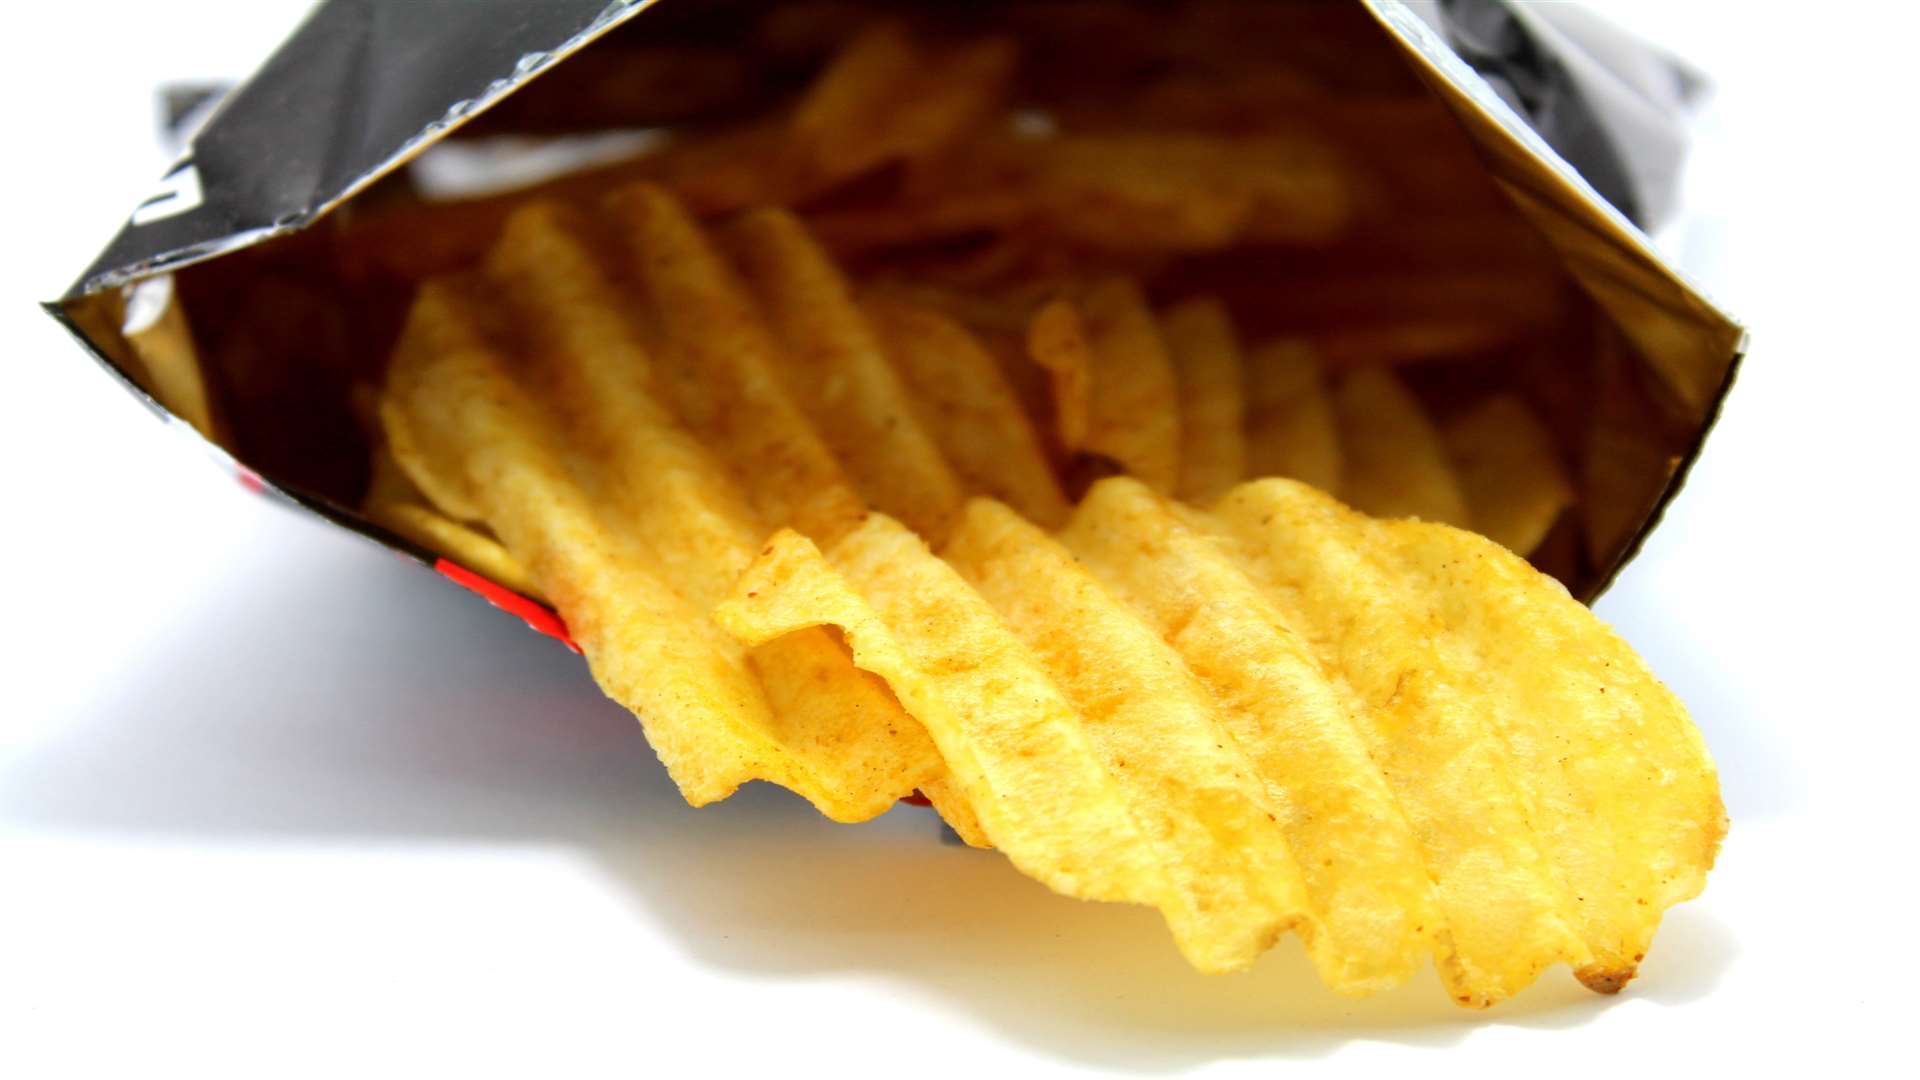 Crisps have been banned from Wateringbury Primary School